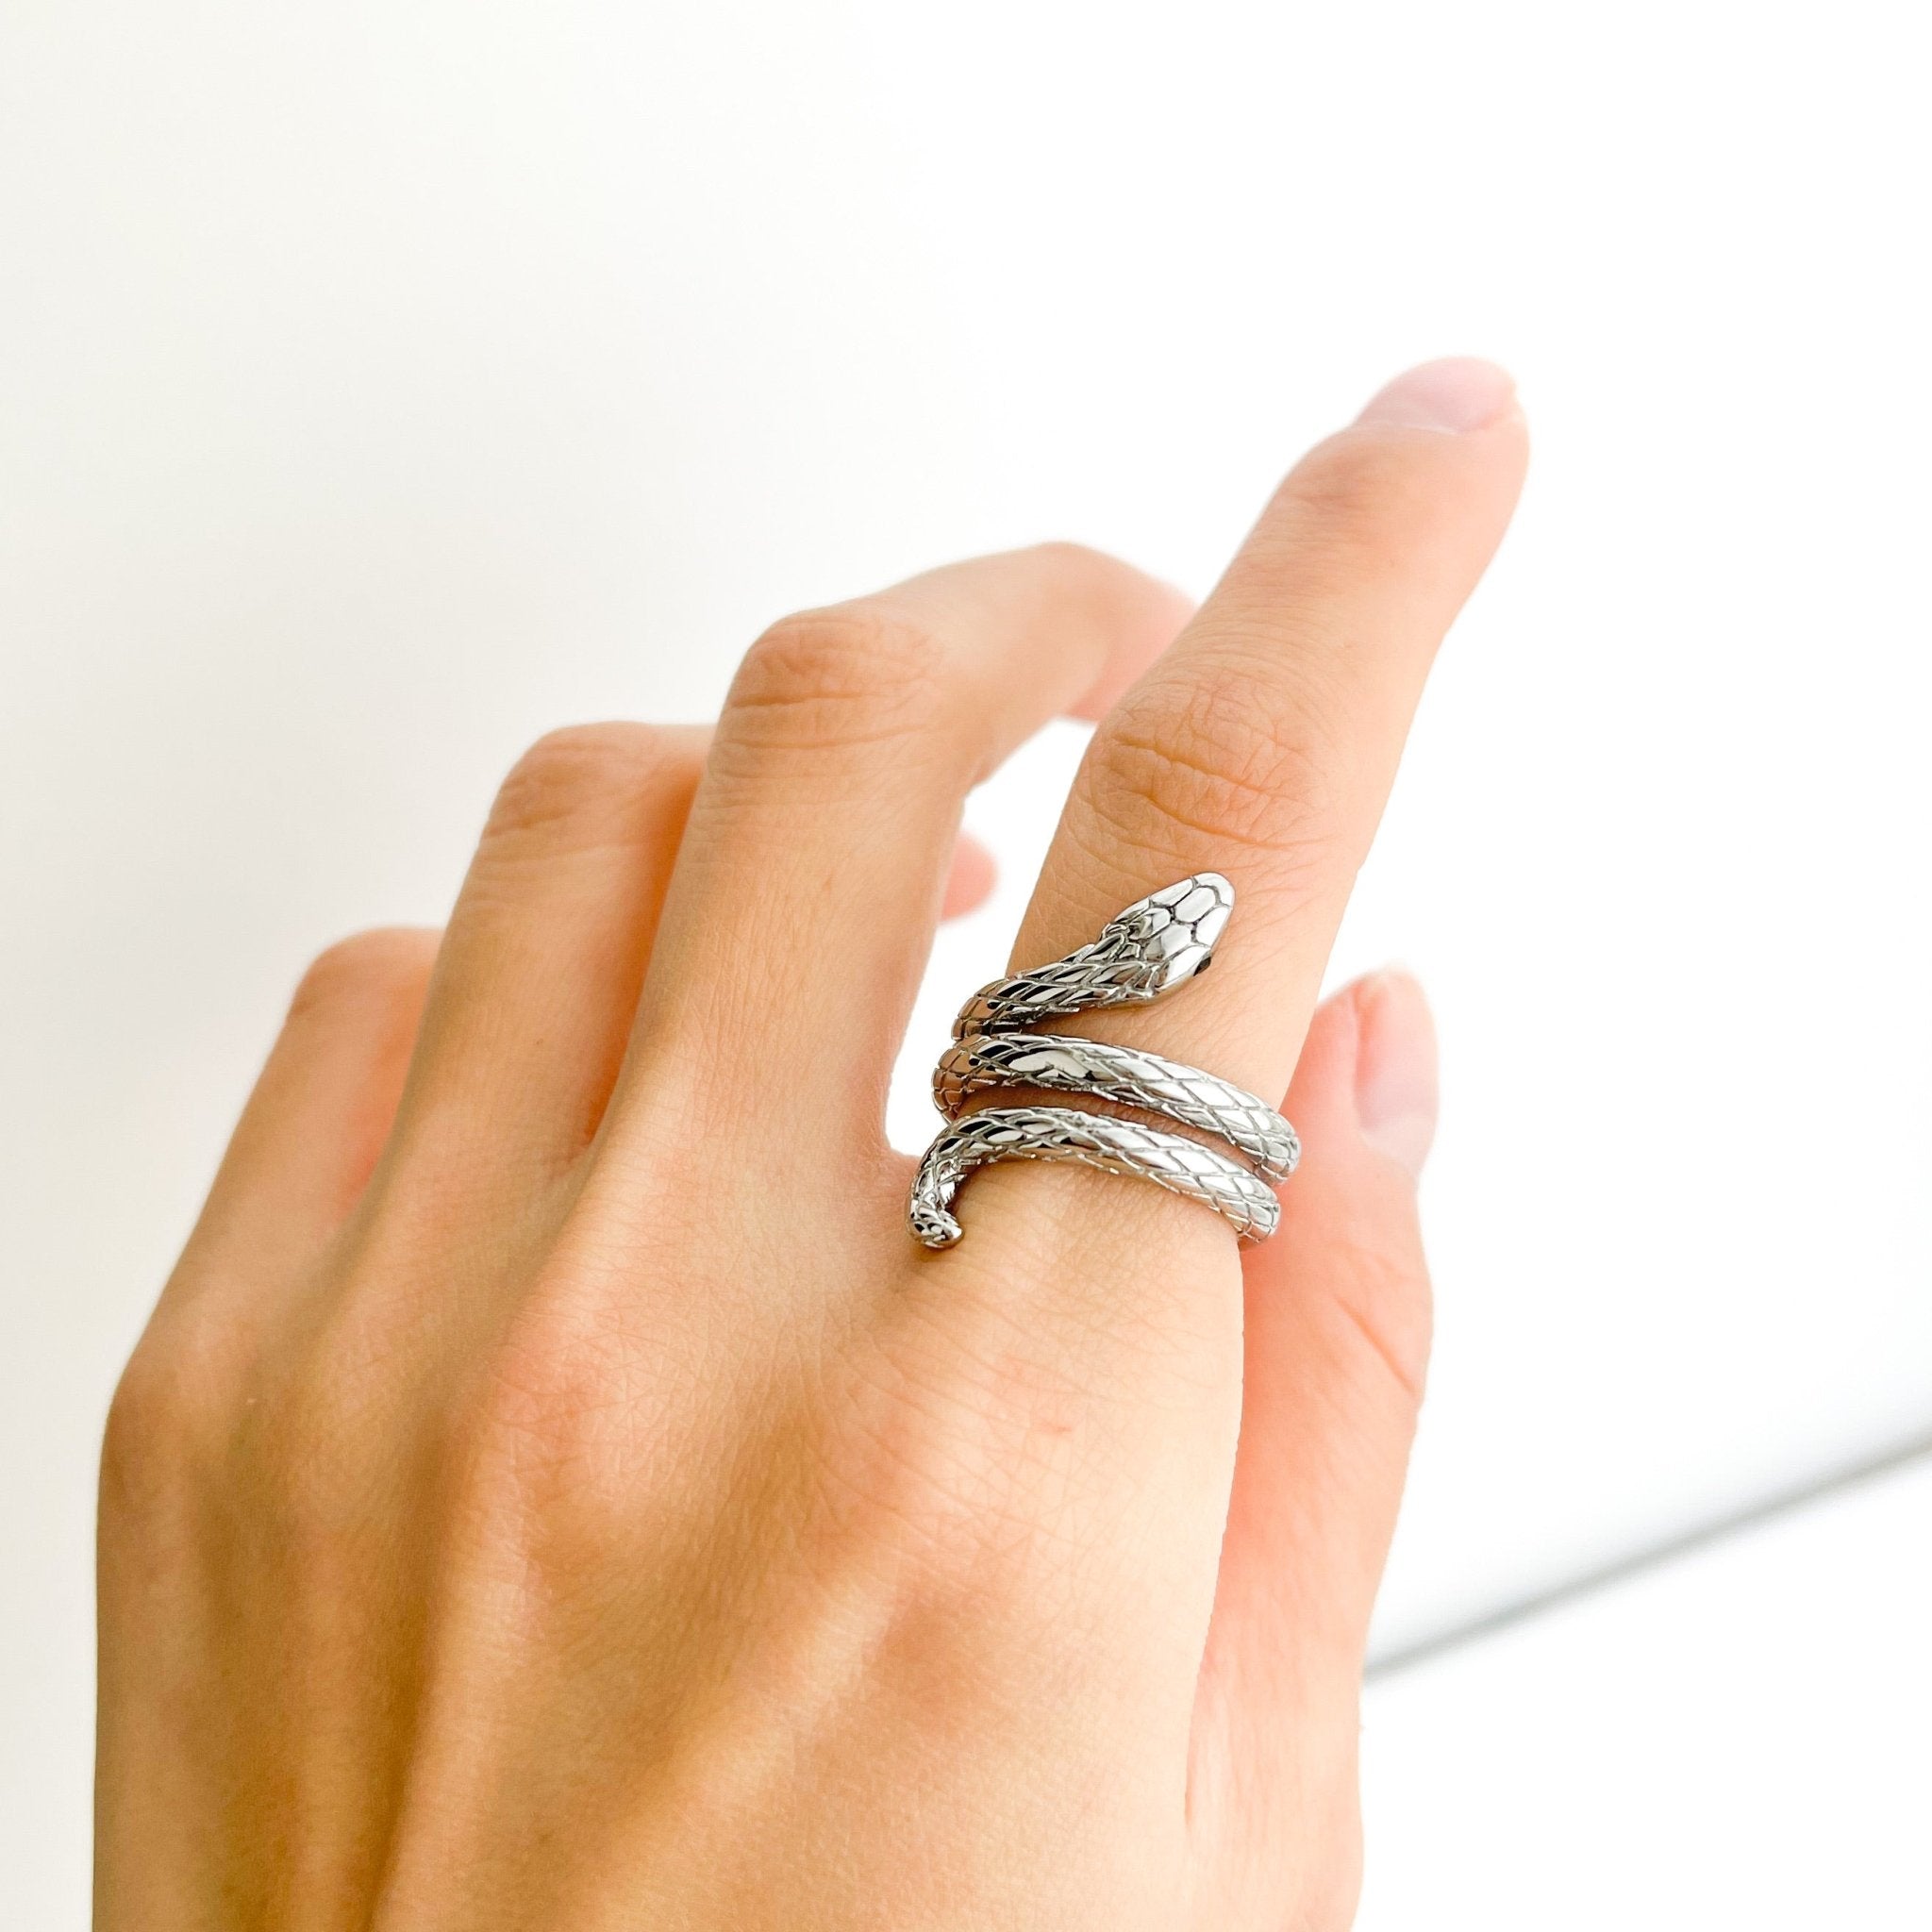 Silver Snake Ring - Flaire & Co.